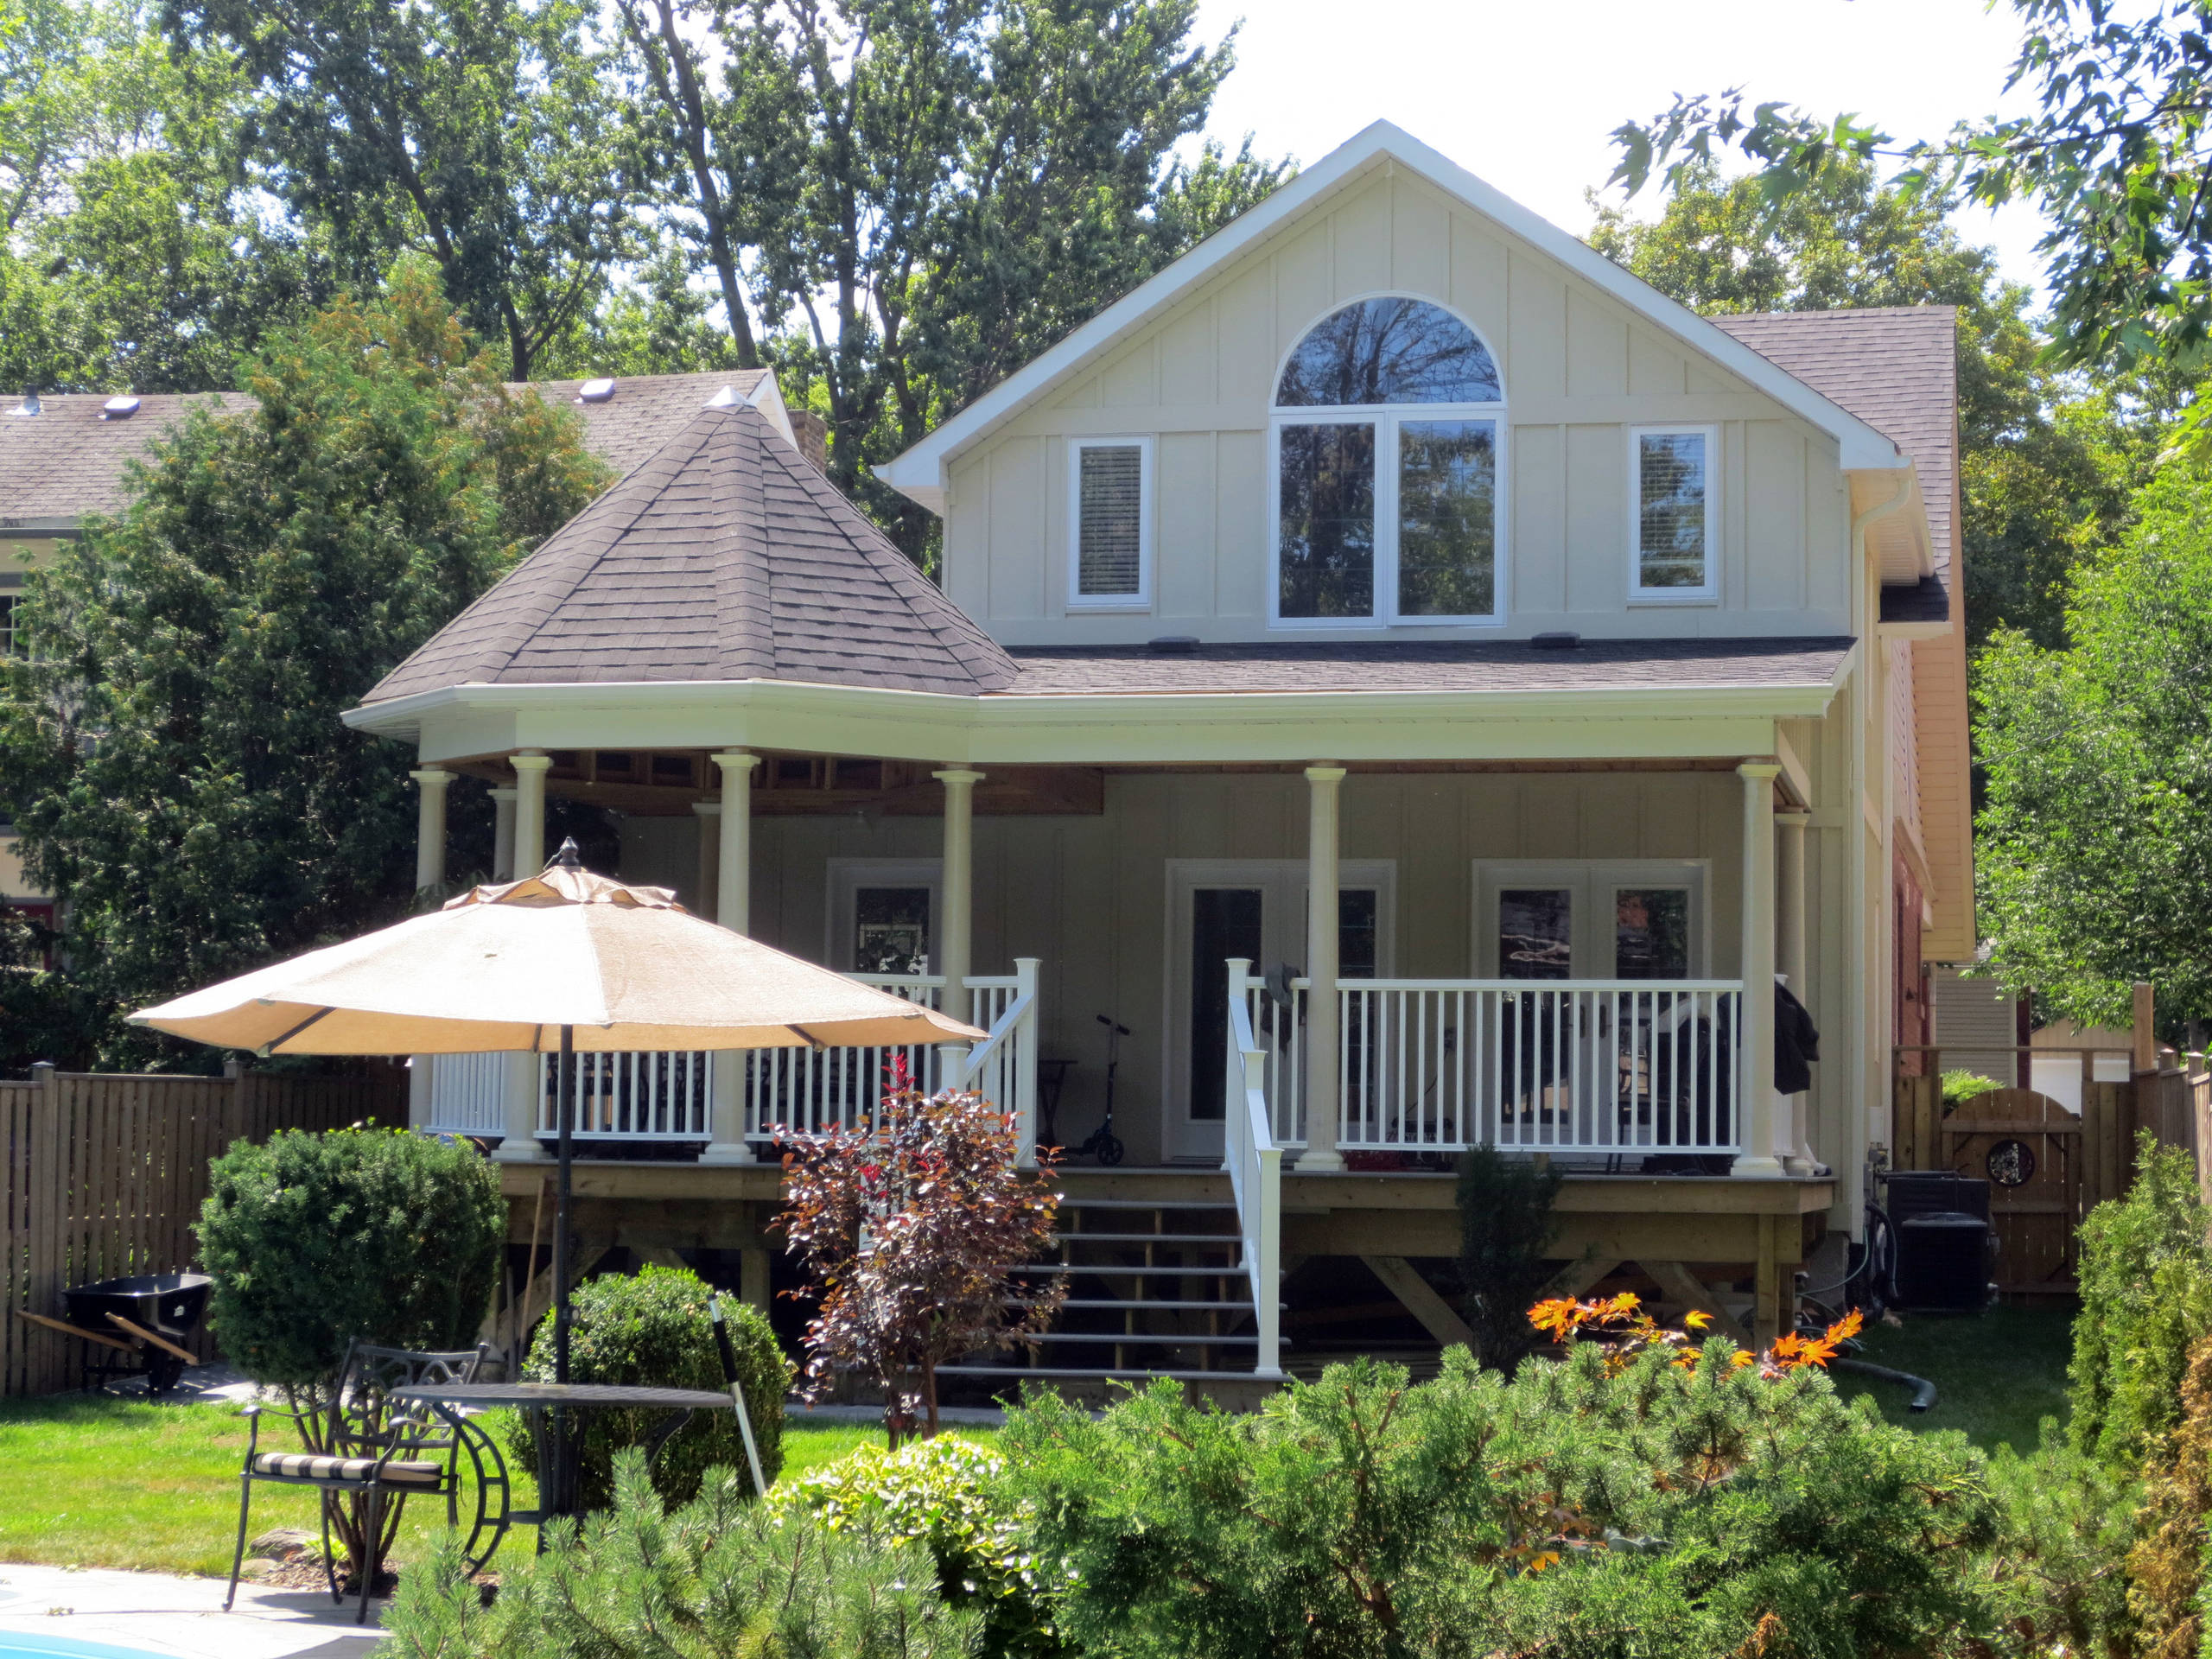 Mill, Brampton - Addition, porch and Gazebo on heritage home